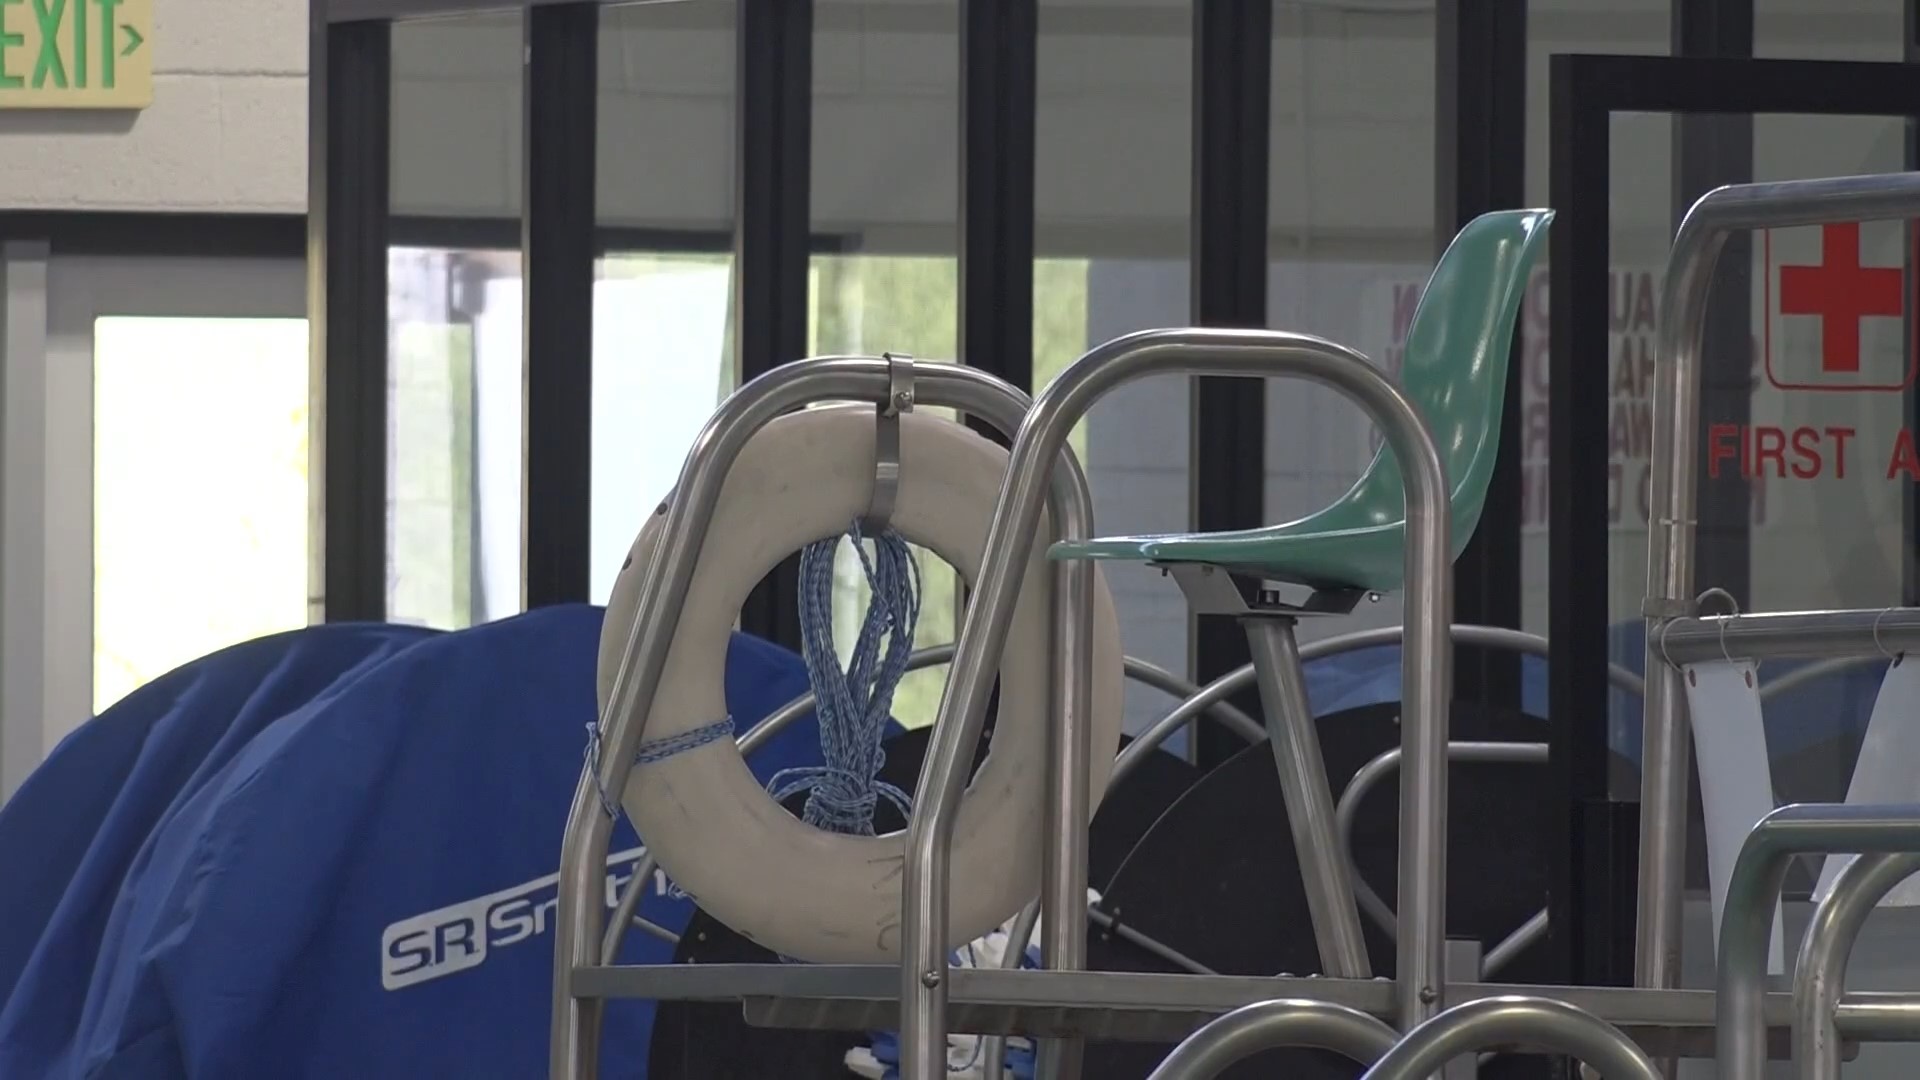 With an increase in summer pay and benefits, city pools are gearing up for a busy season for its public pools.